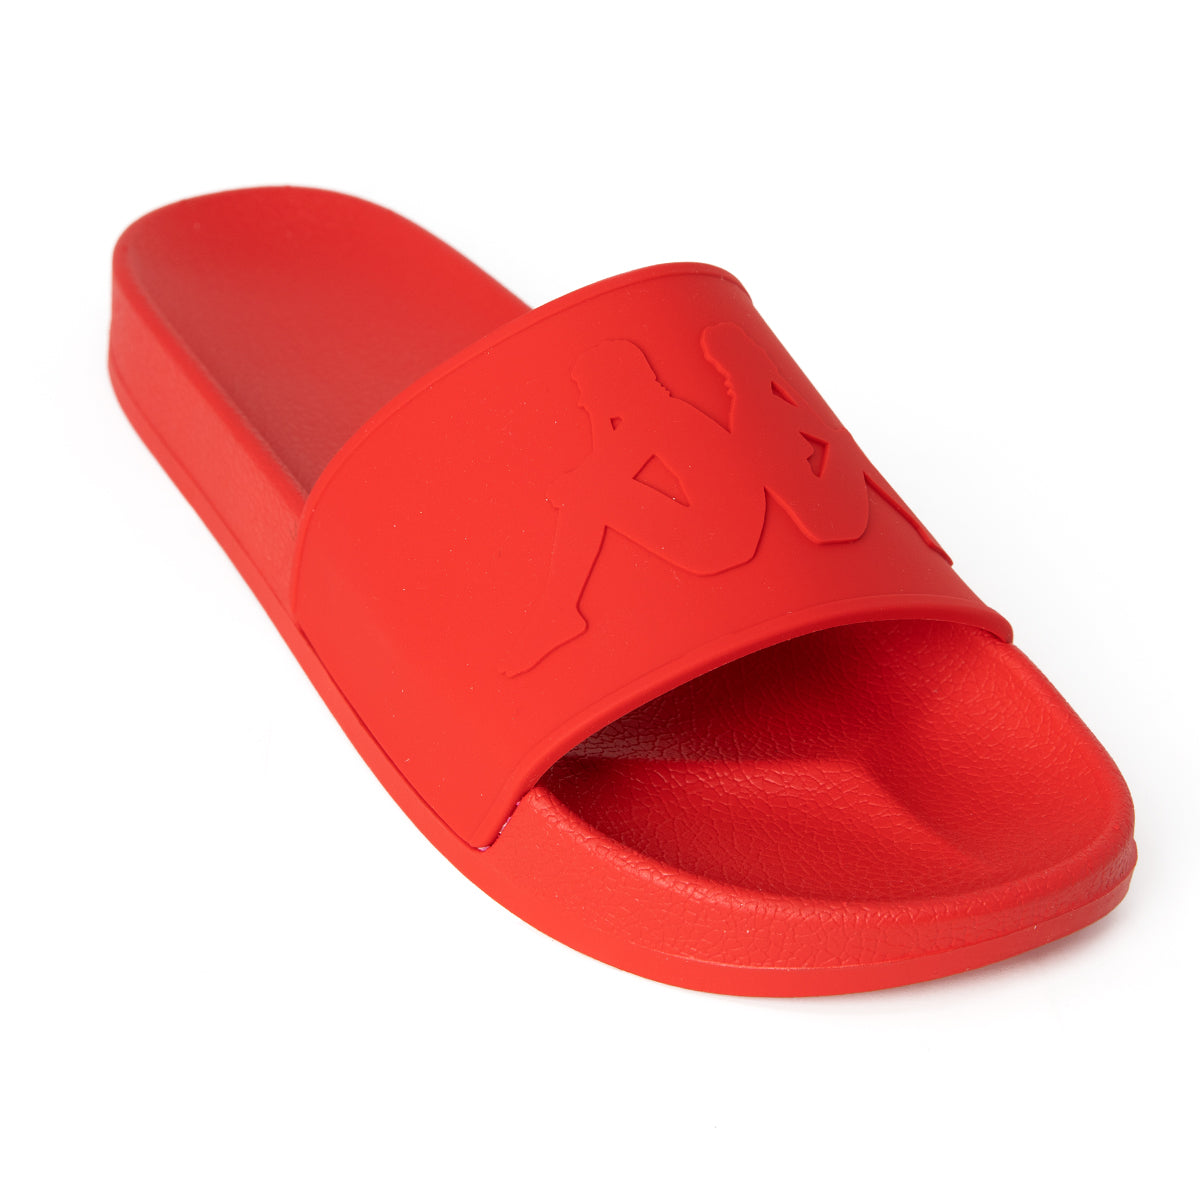 Authentic Caius 2 Slides - Red – Kappa USA